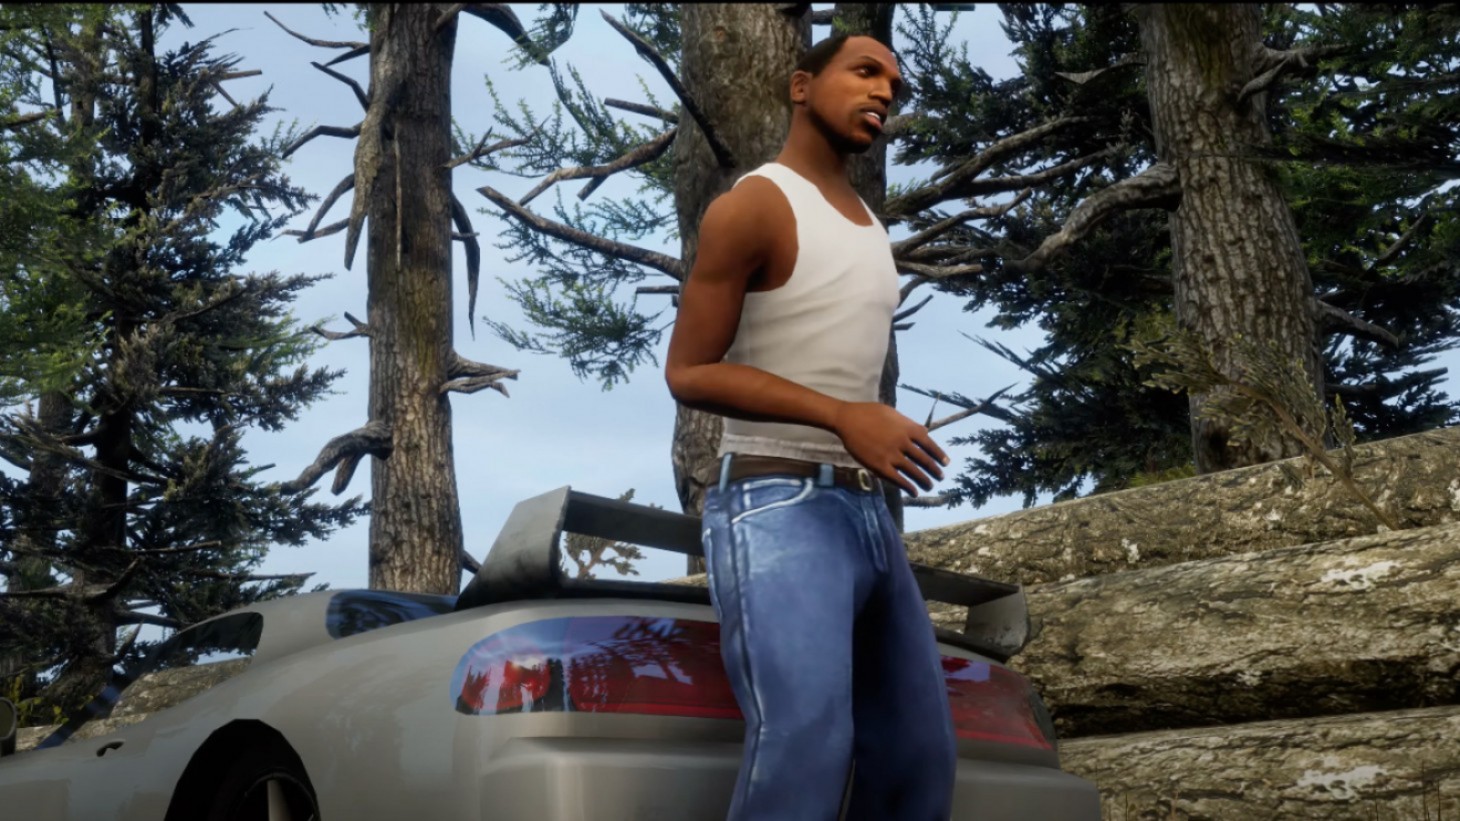 Rockstar Removing Access To Play or Purchase GTA: The Trilogy